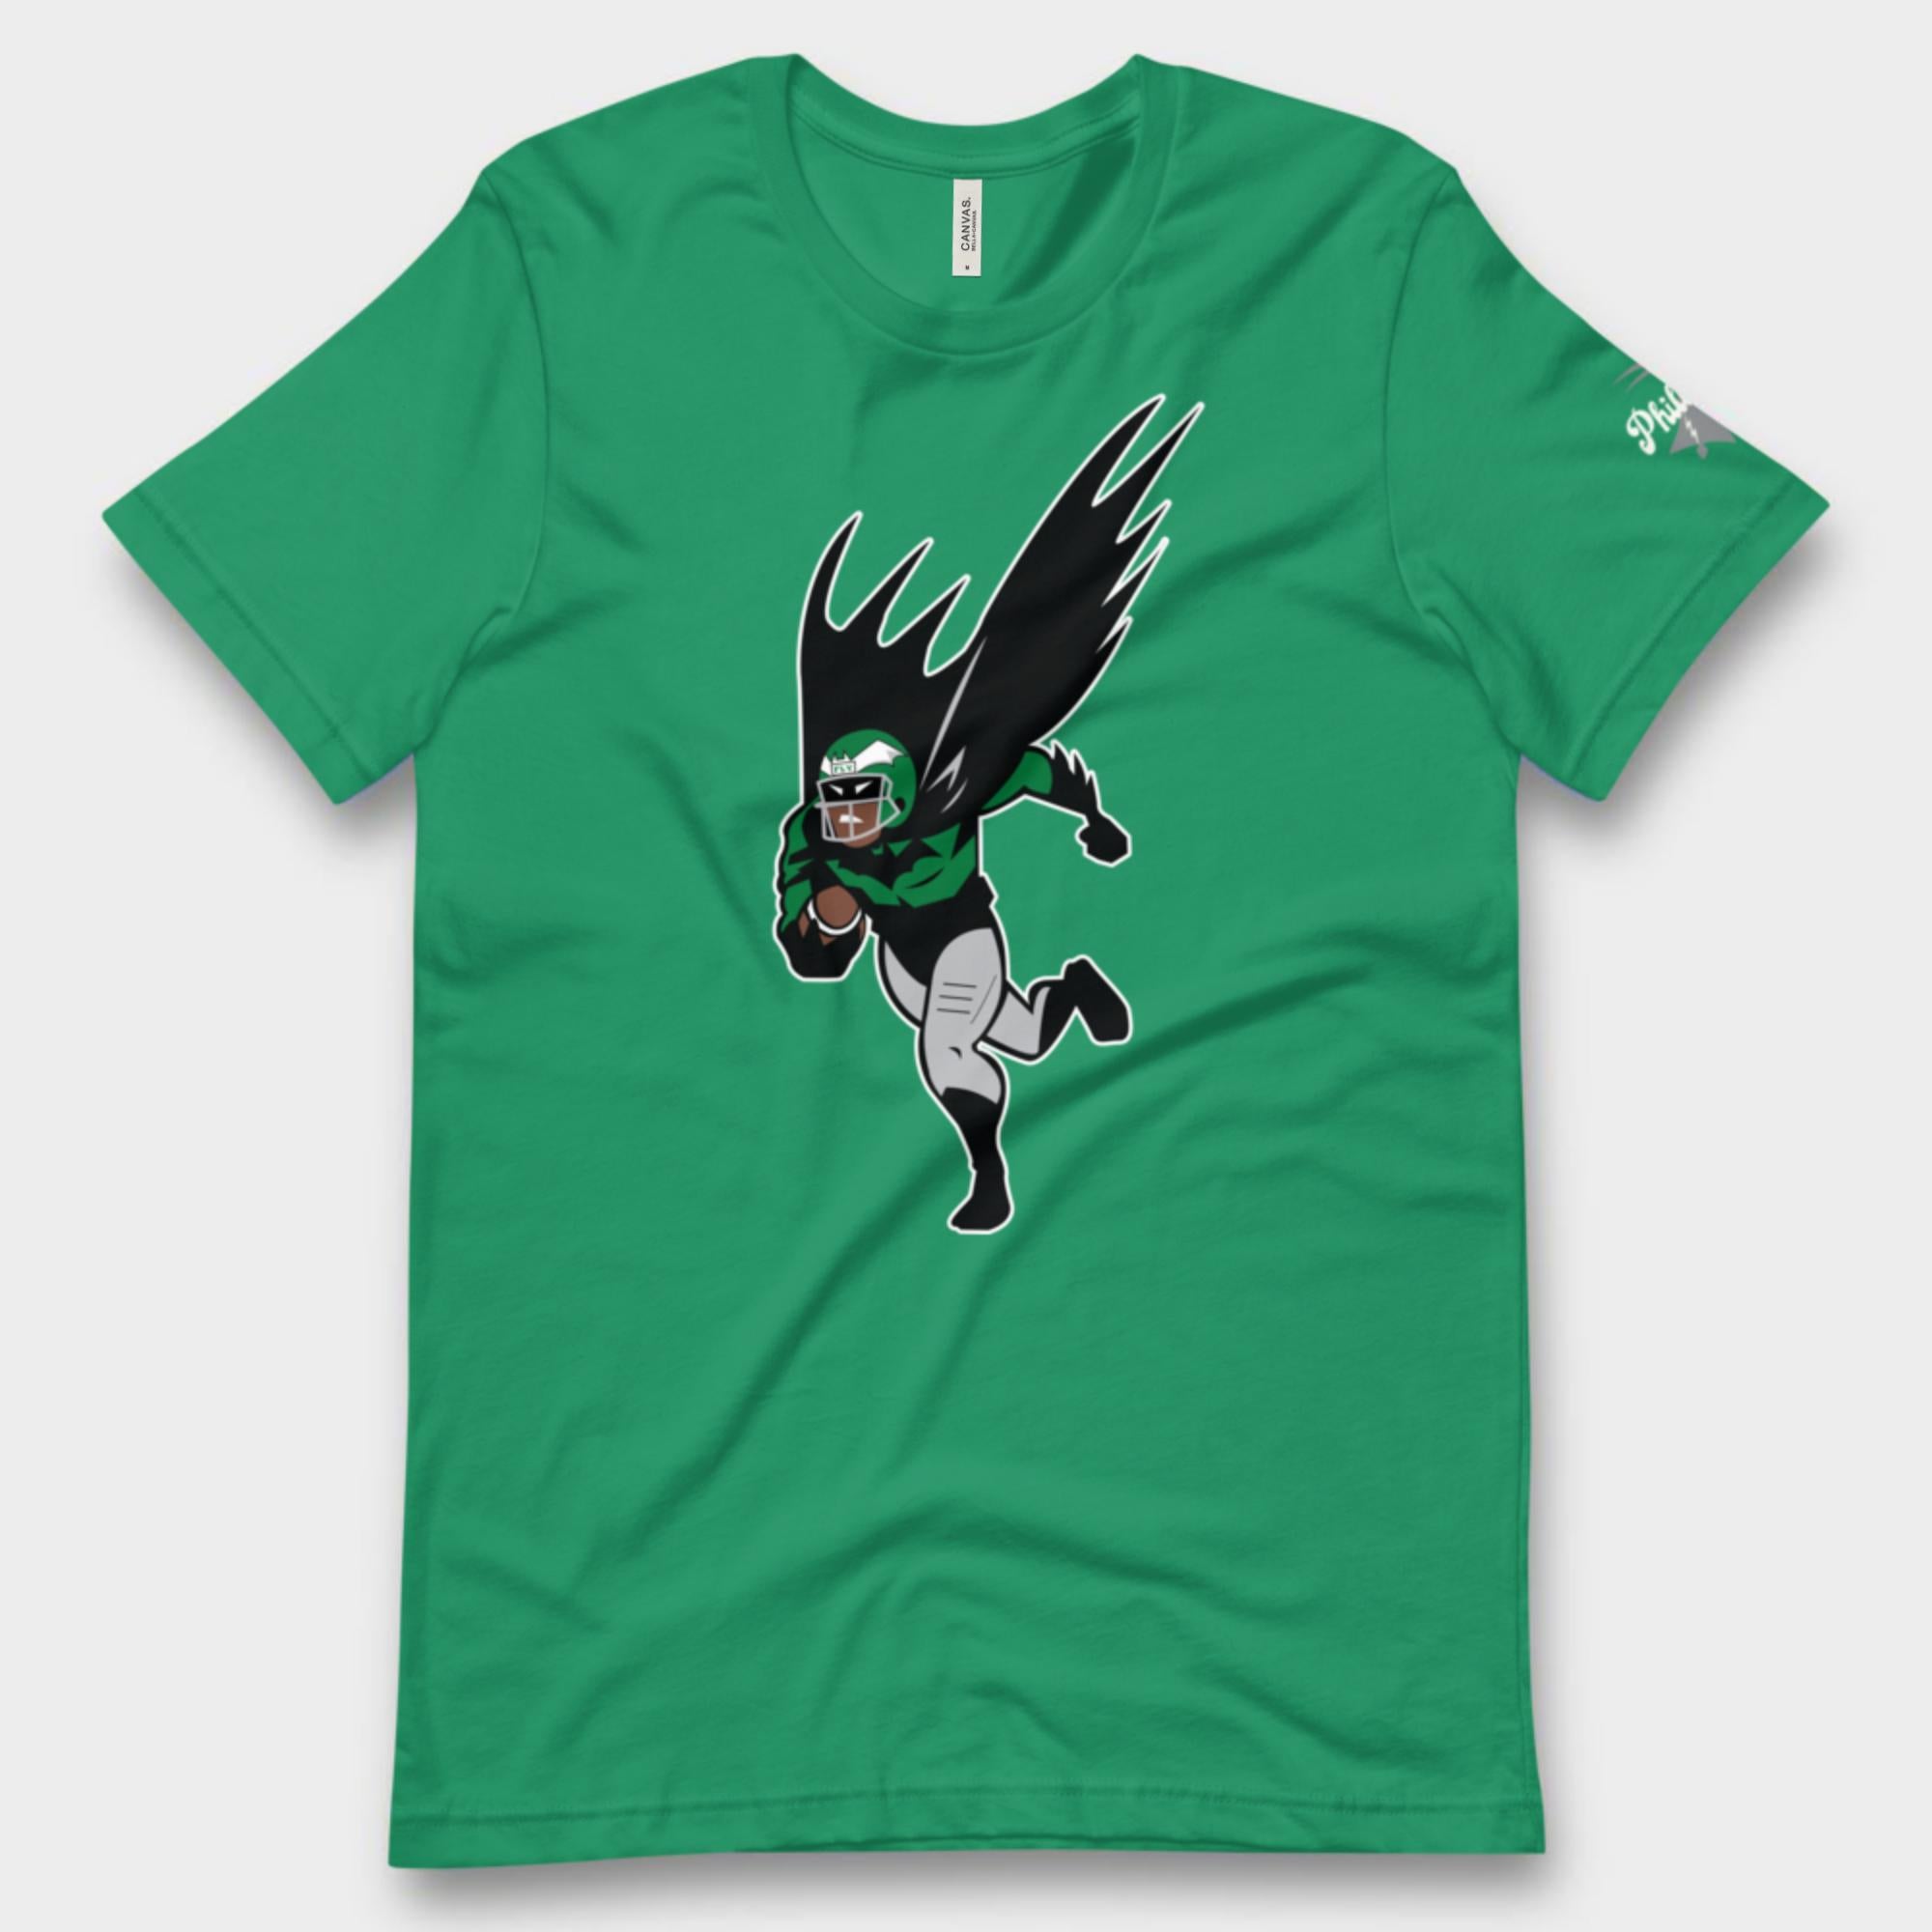 "The Caped Receiver" Tee